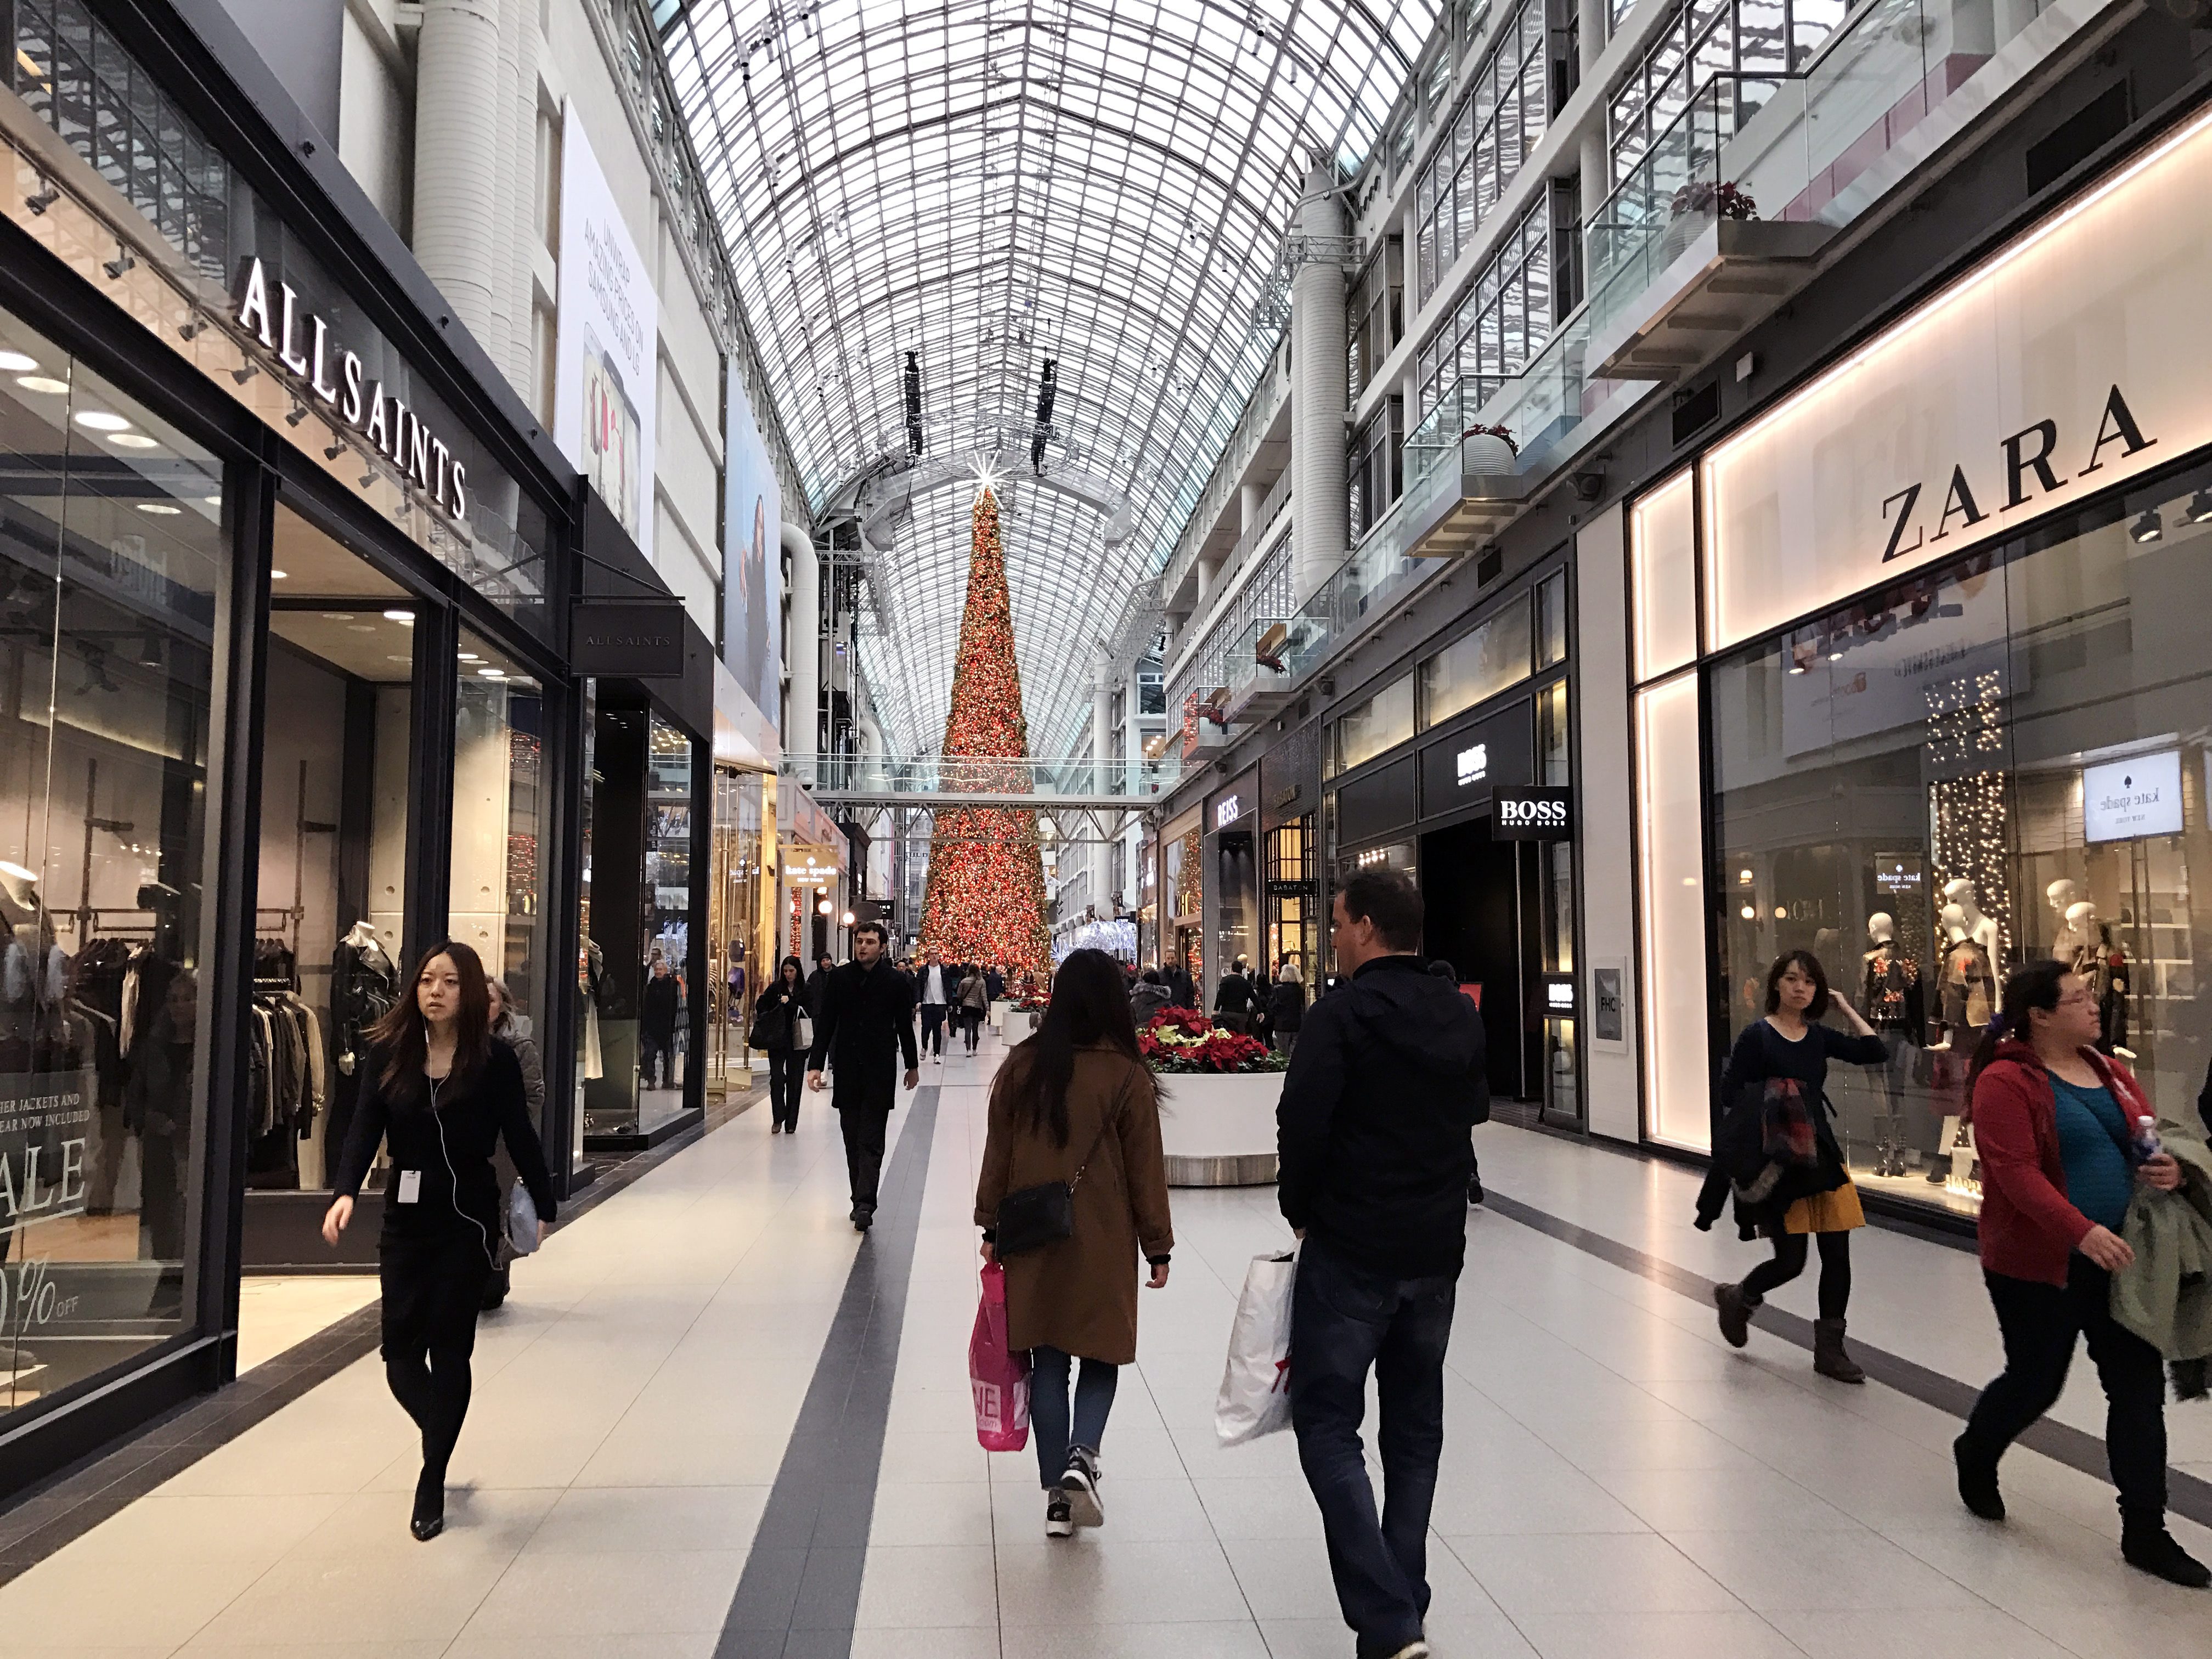 Police called to manage unexpected crowd at Toronto Eaton Centre